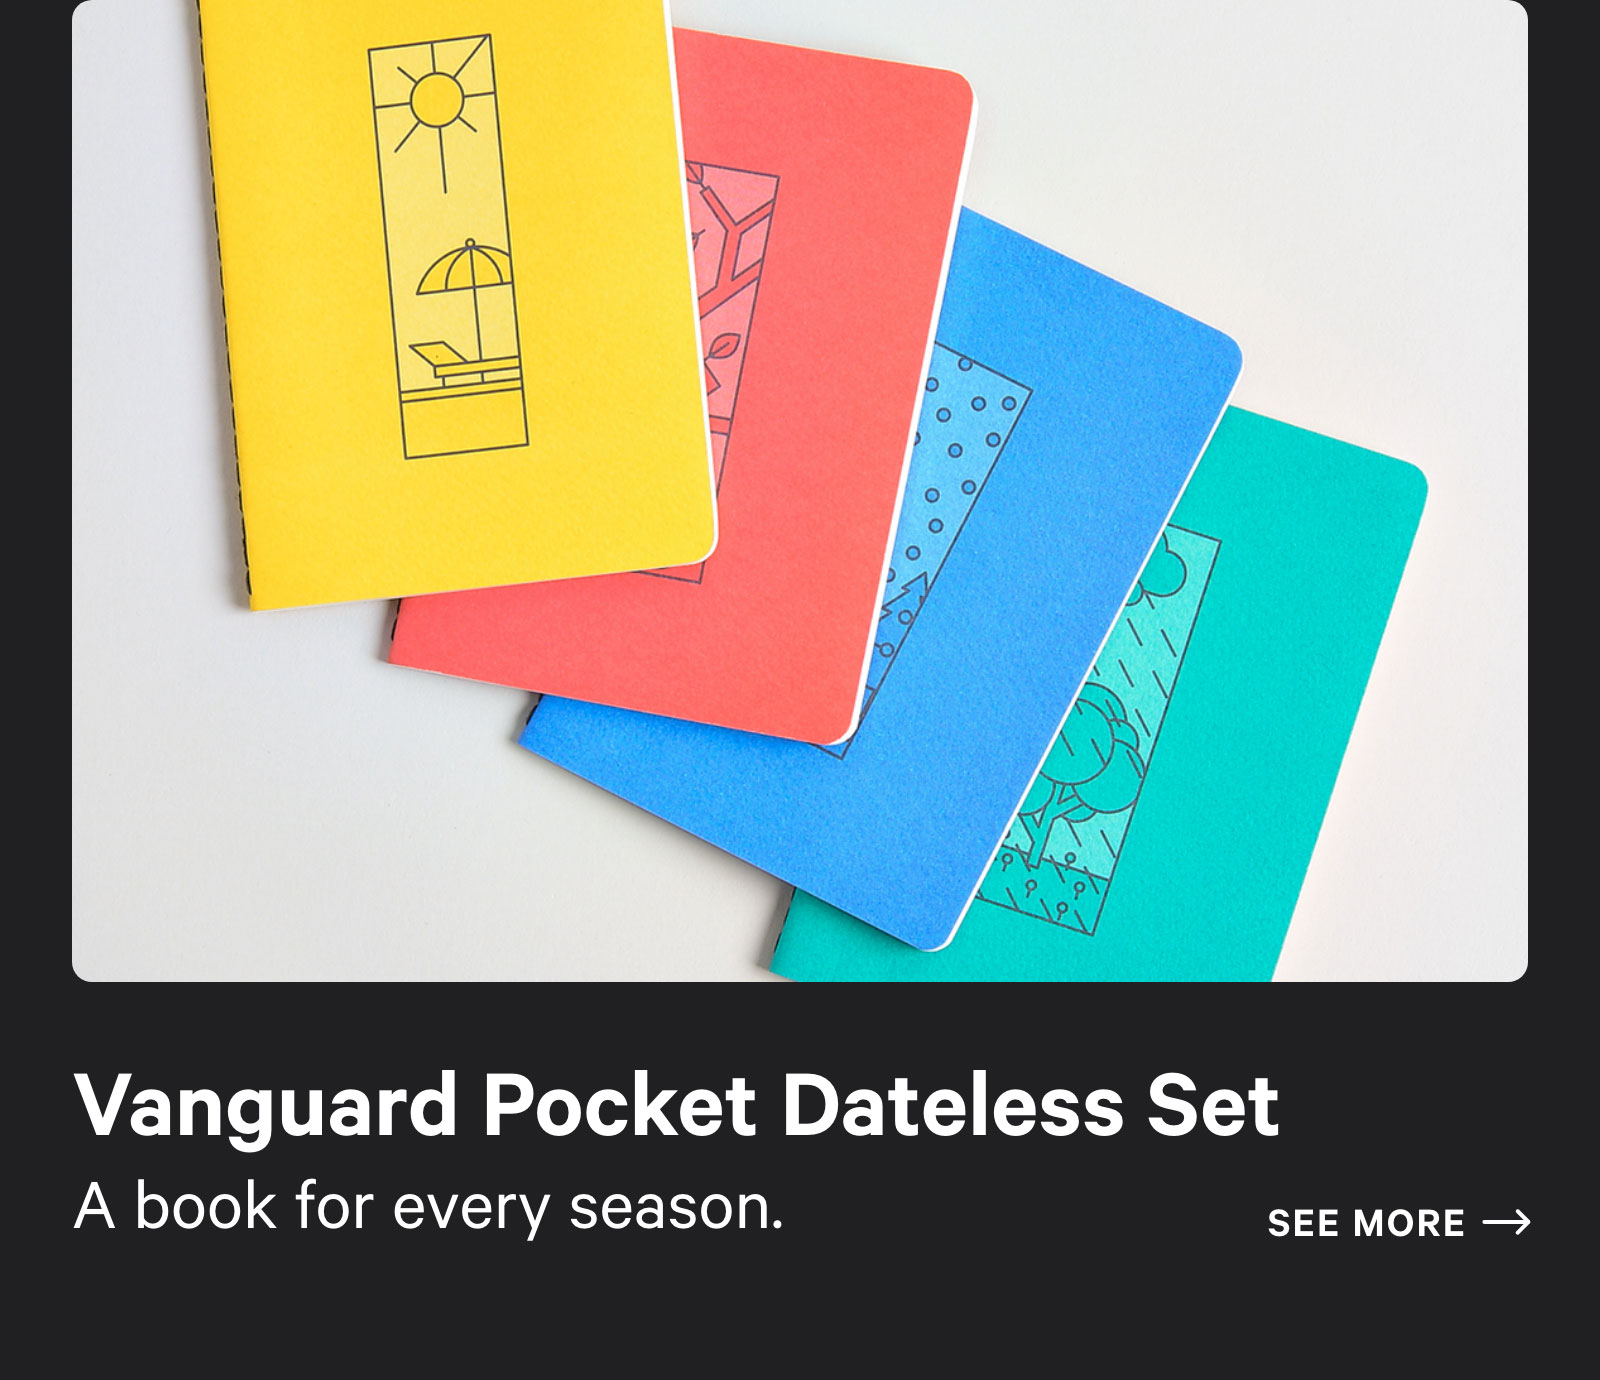 Vangaurd Pocket Dateless Set. A book for every season. See more ?